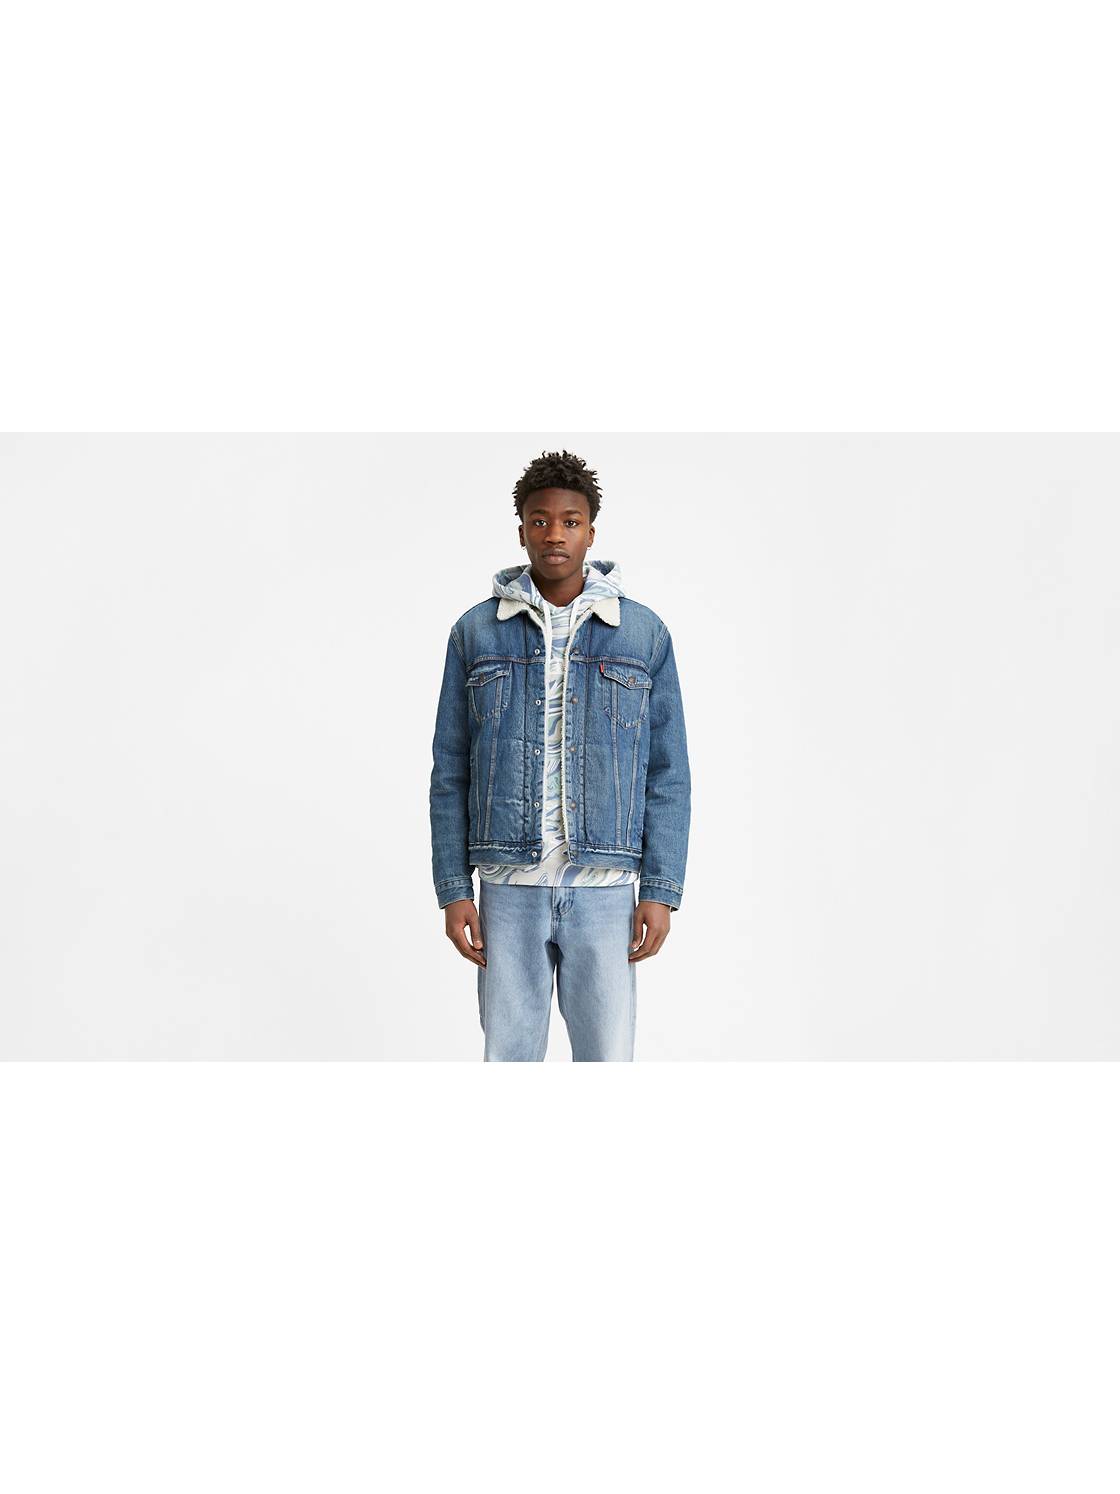 Carhartt Men's Relaxed Fit Denim Sherpa-Lined Jacket at Tractor